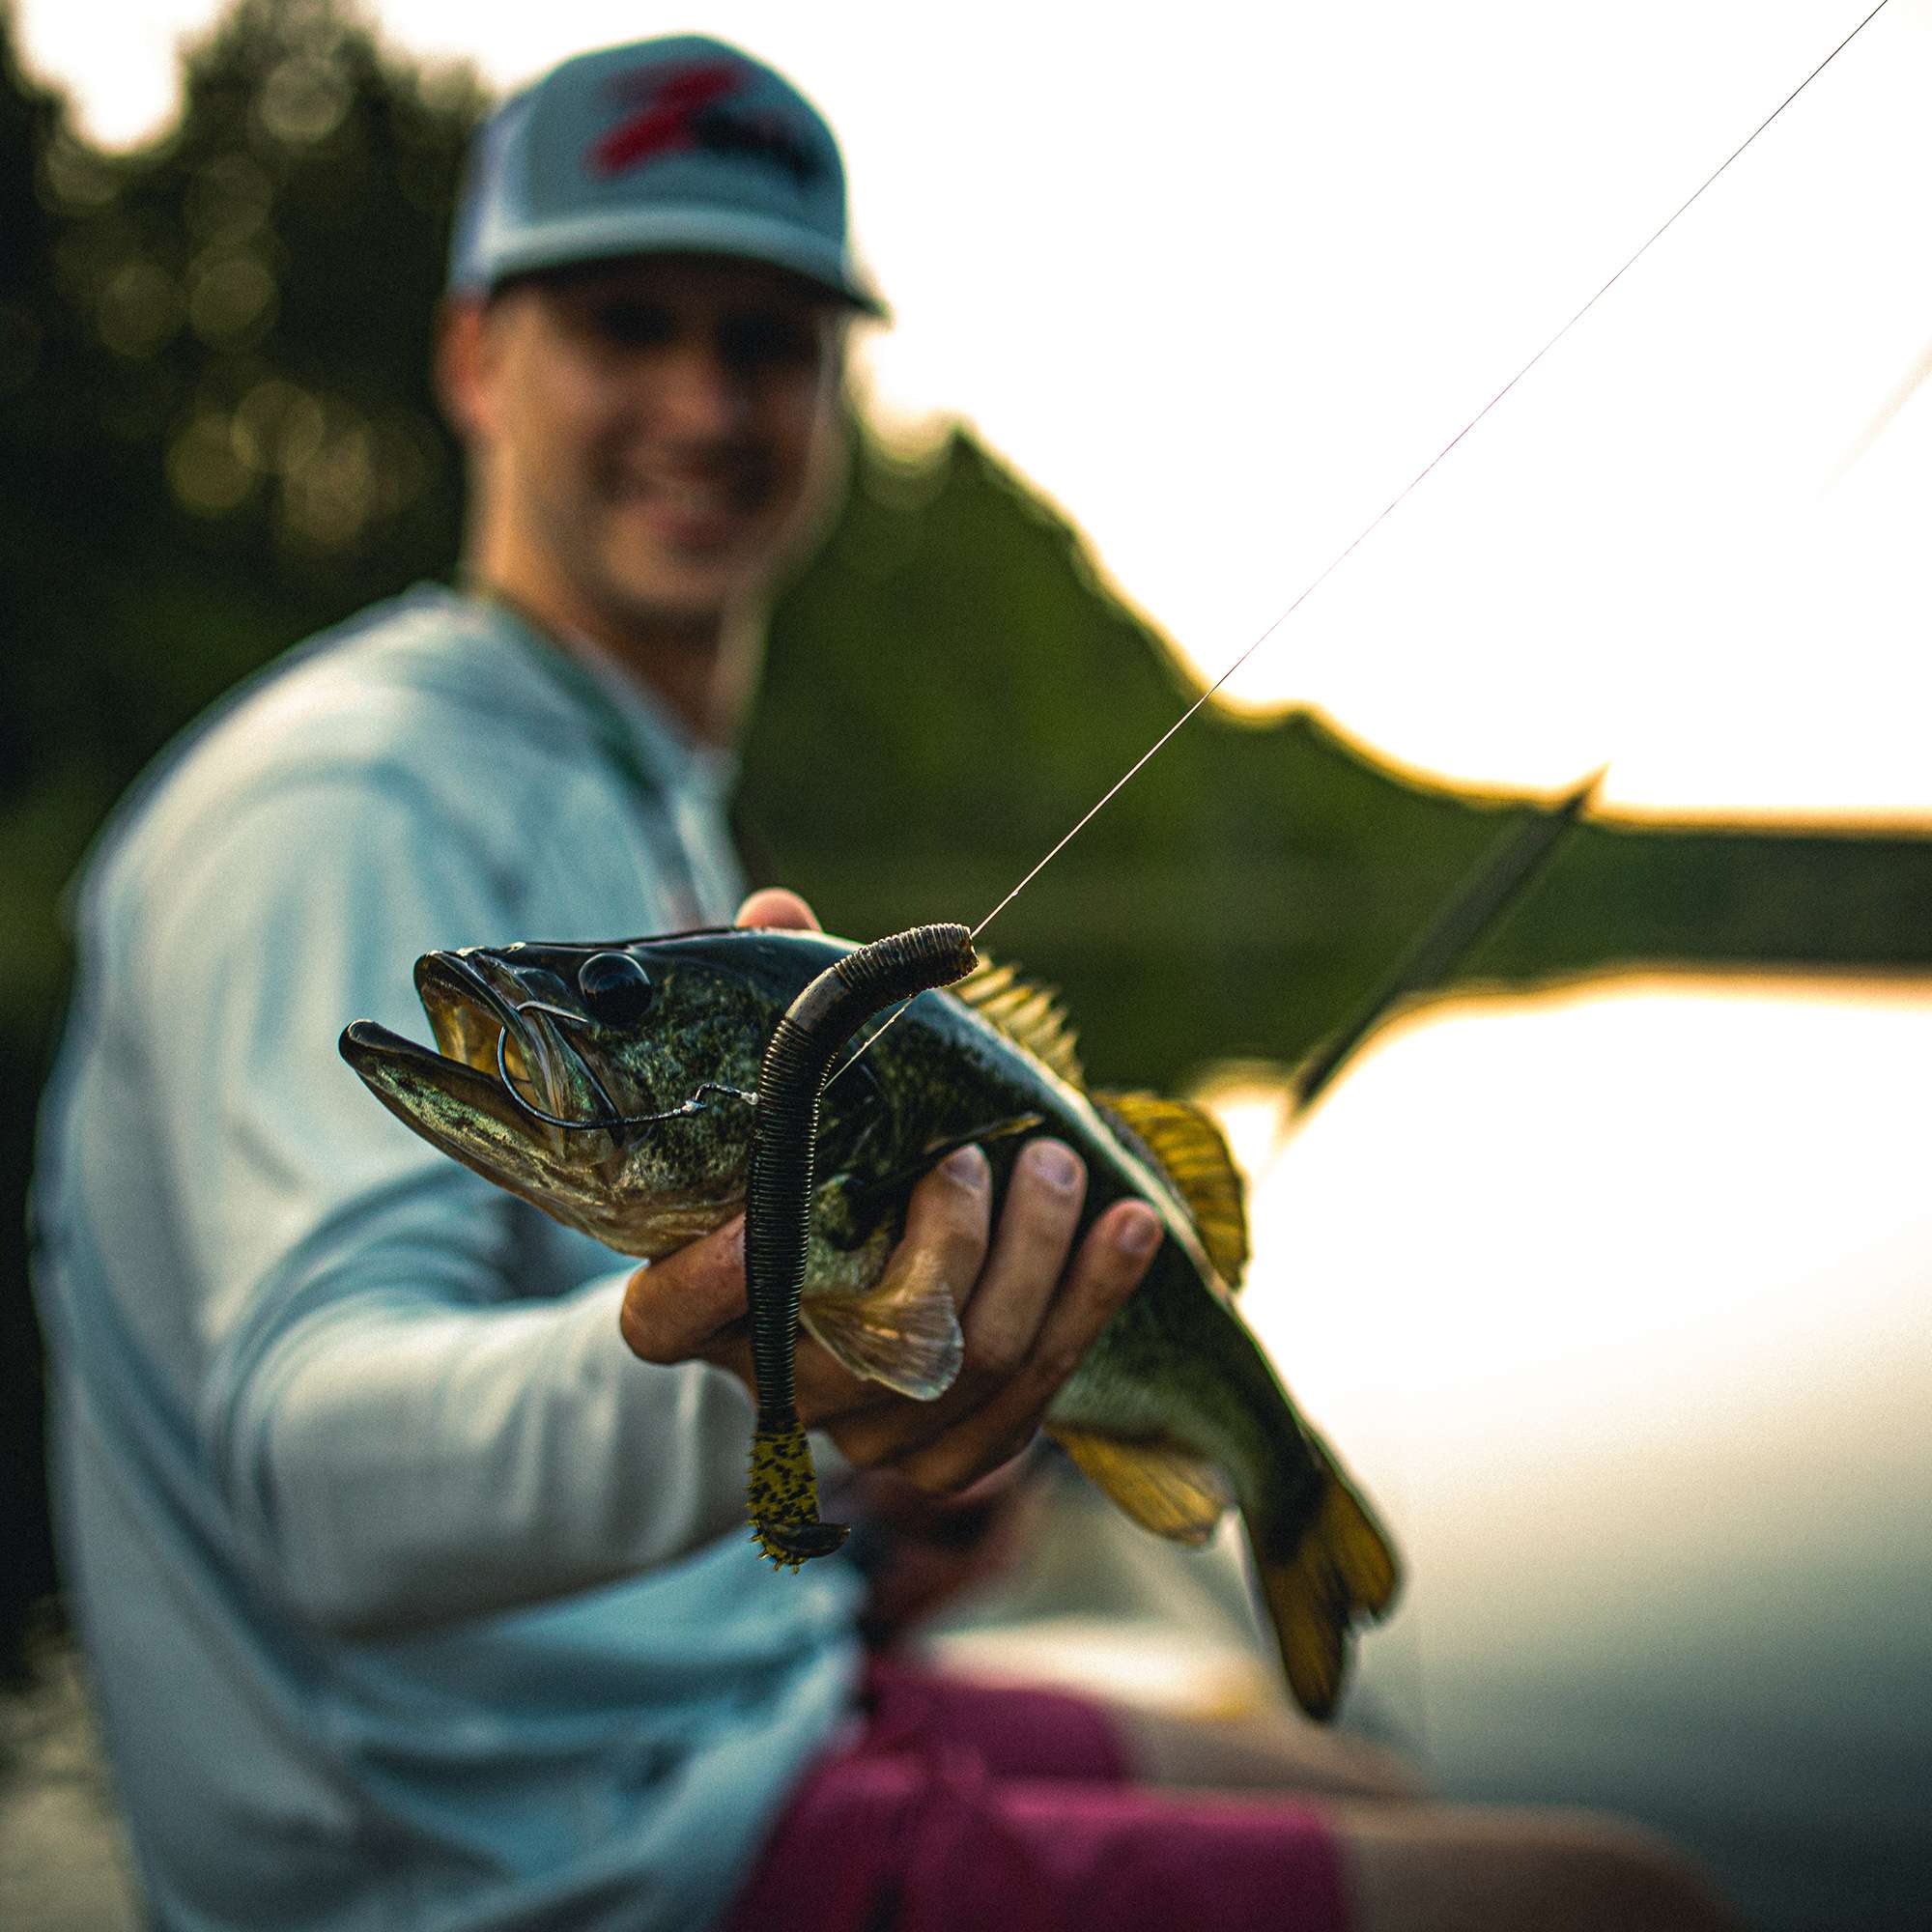 Providing near-neutral buoyancy, a dosage of 15-percent impregnated salt also increases the Turbo FattyZâ density for easy casts, even when fished unweighted. 